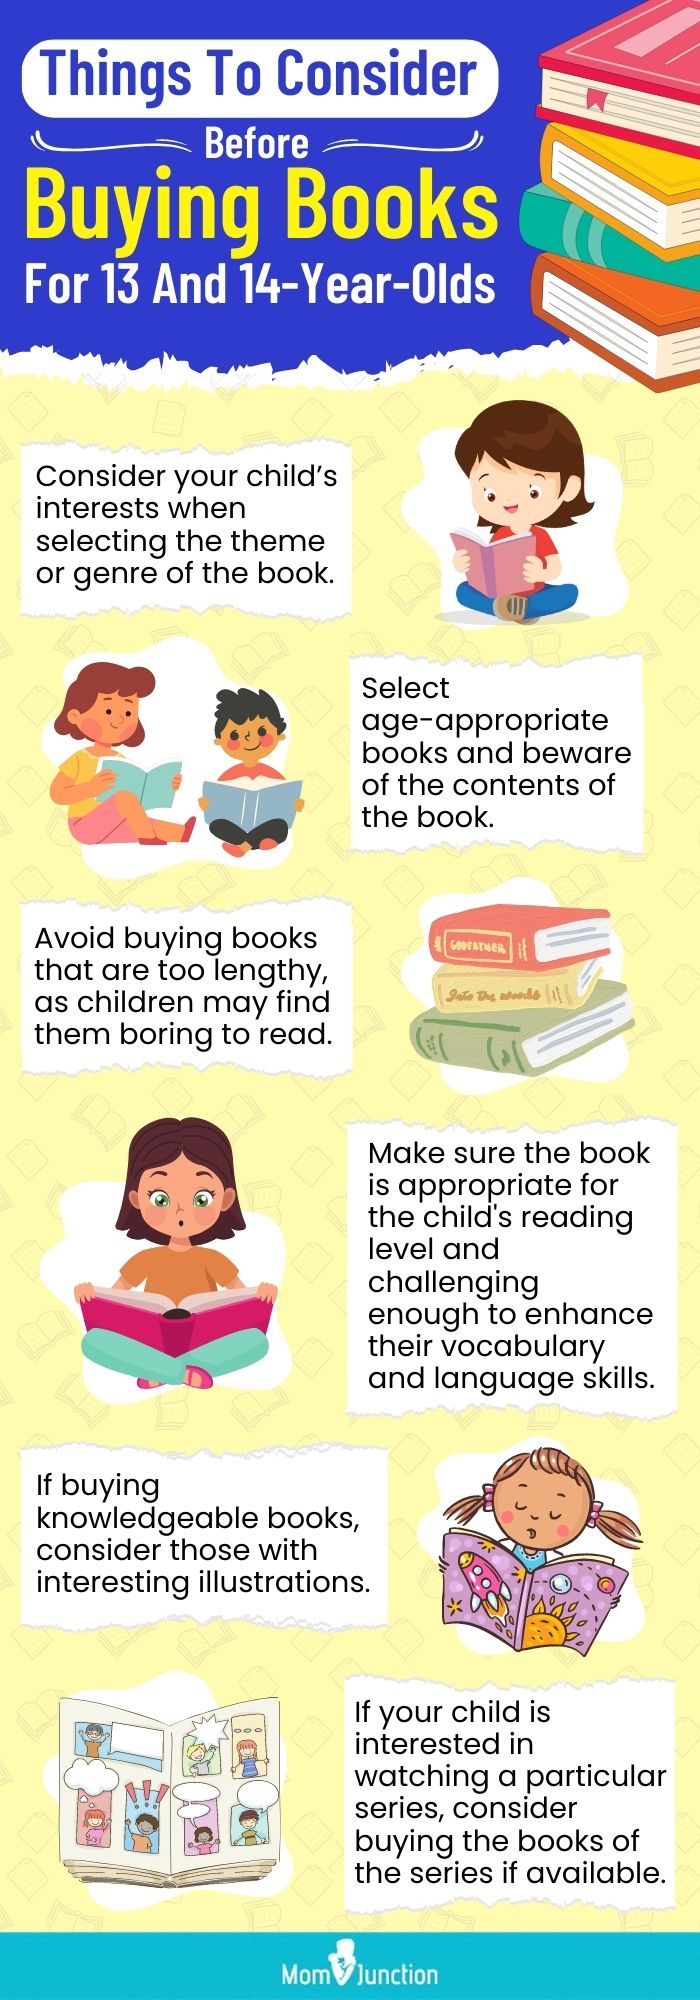 Things To Consider Before Buying Books for 13 And 14-Year-Olds [infographic]